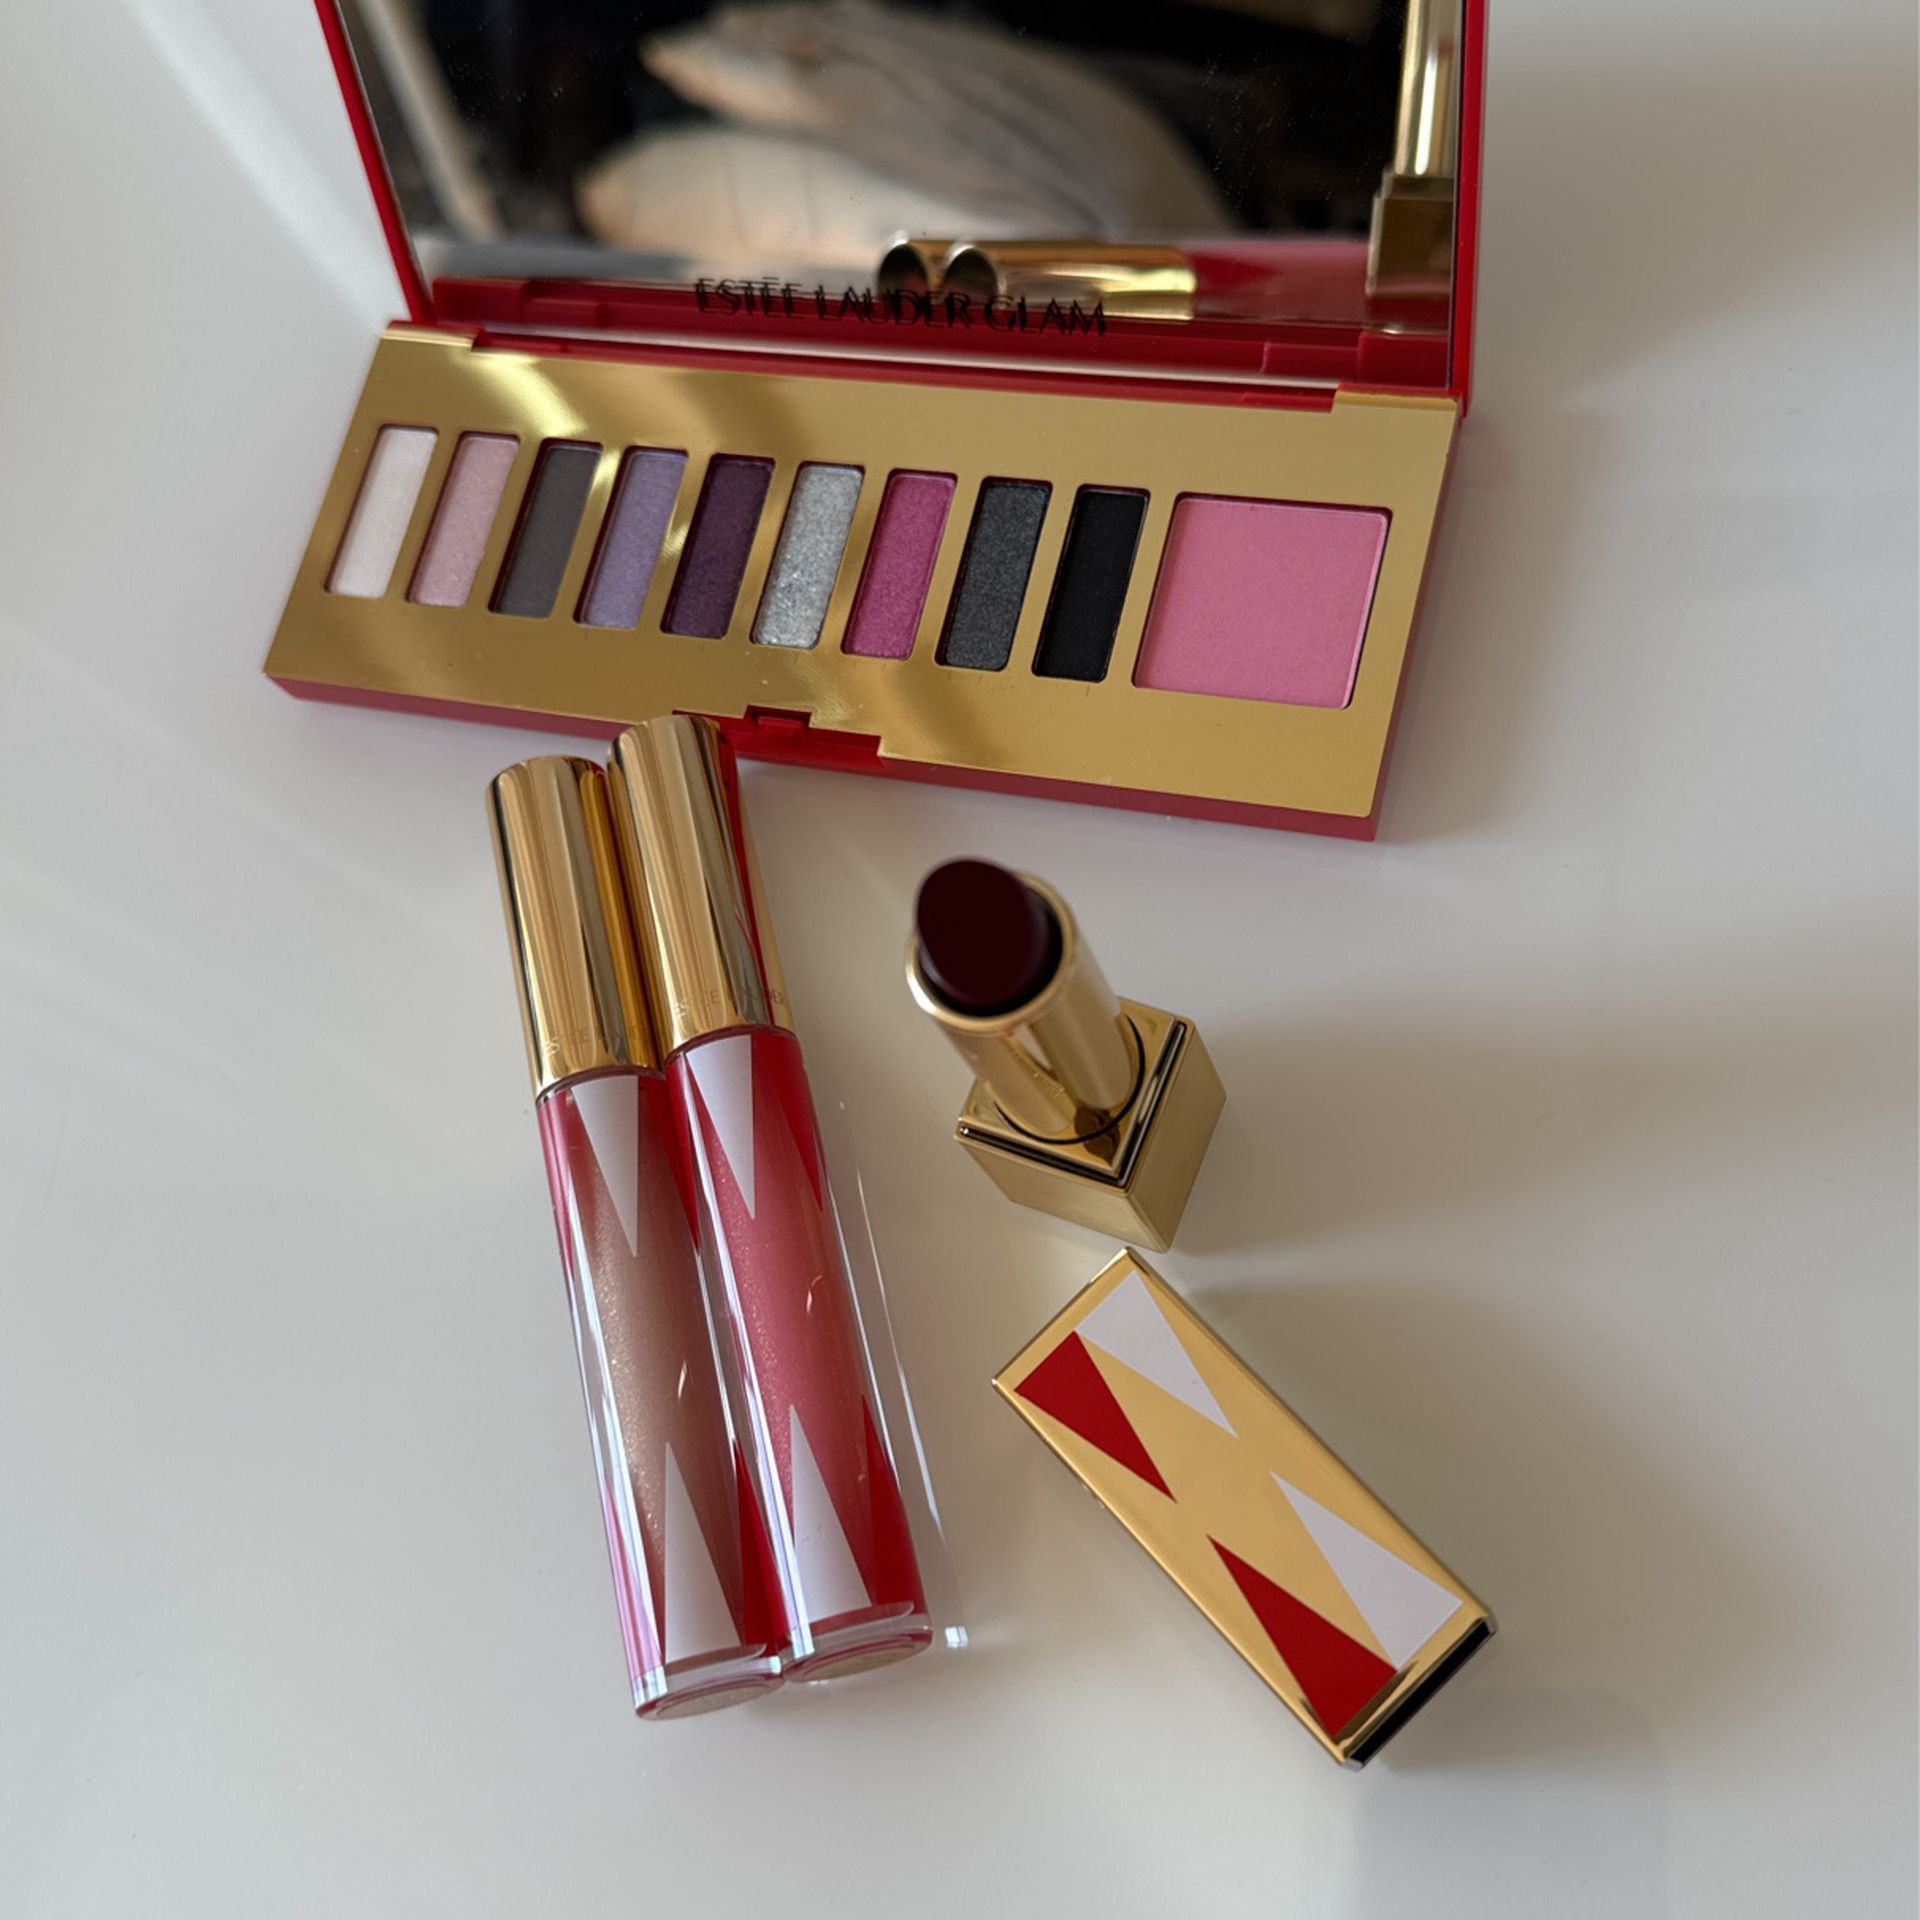 New Stee Lauder Make Up All For $30